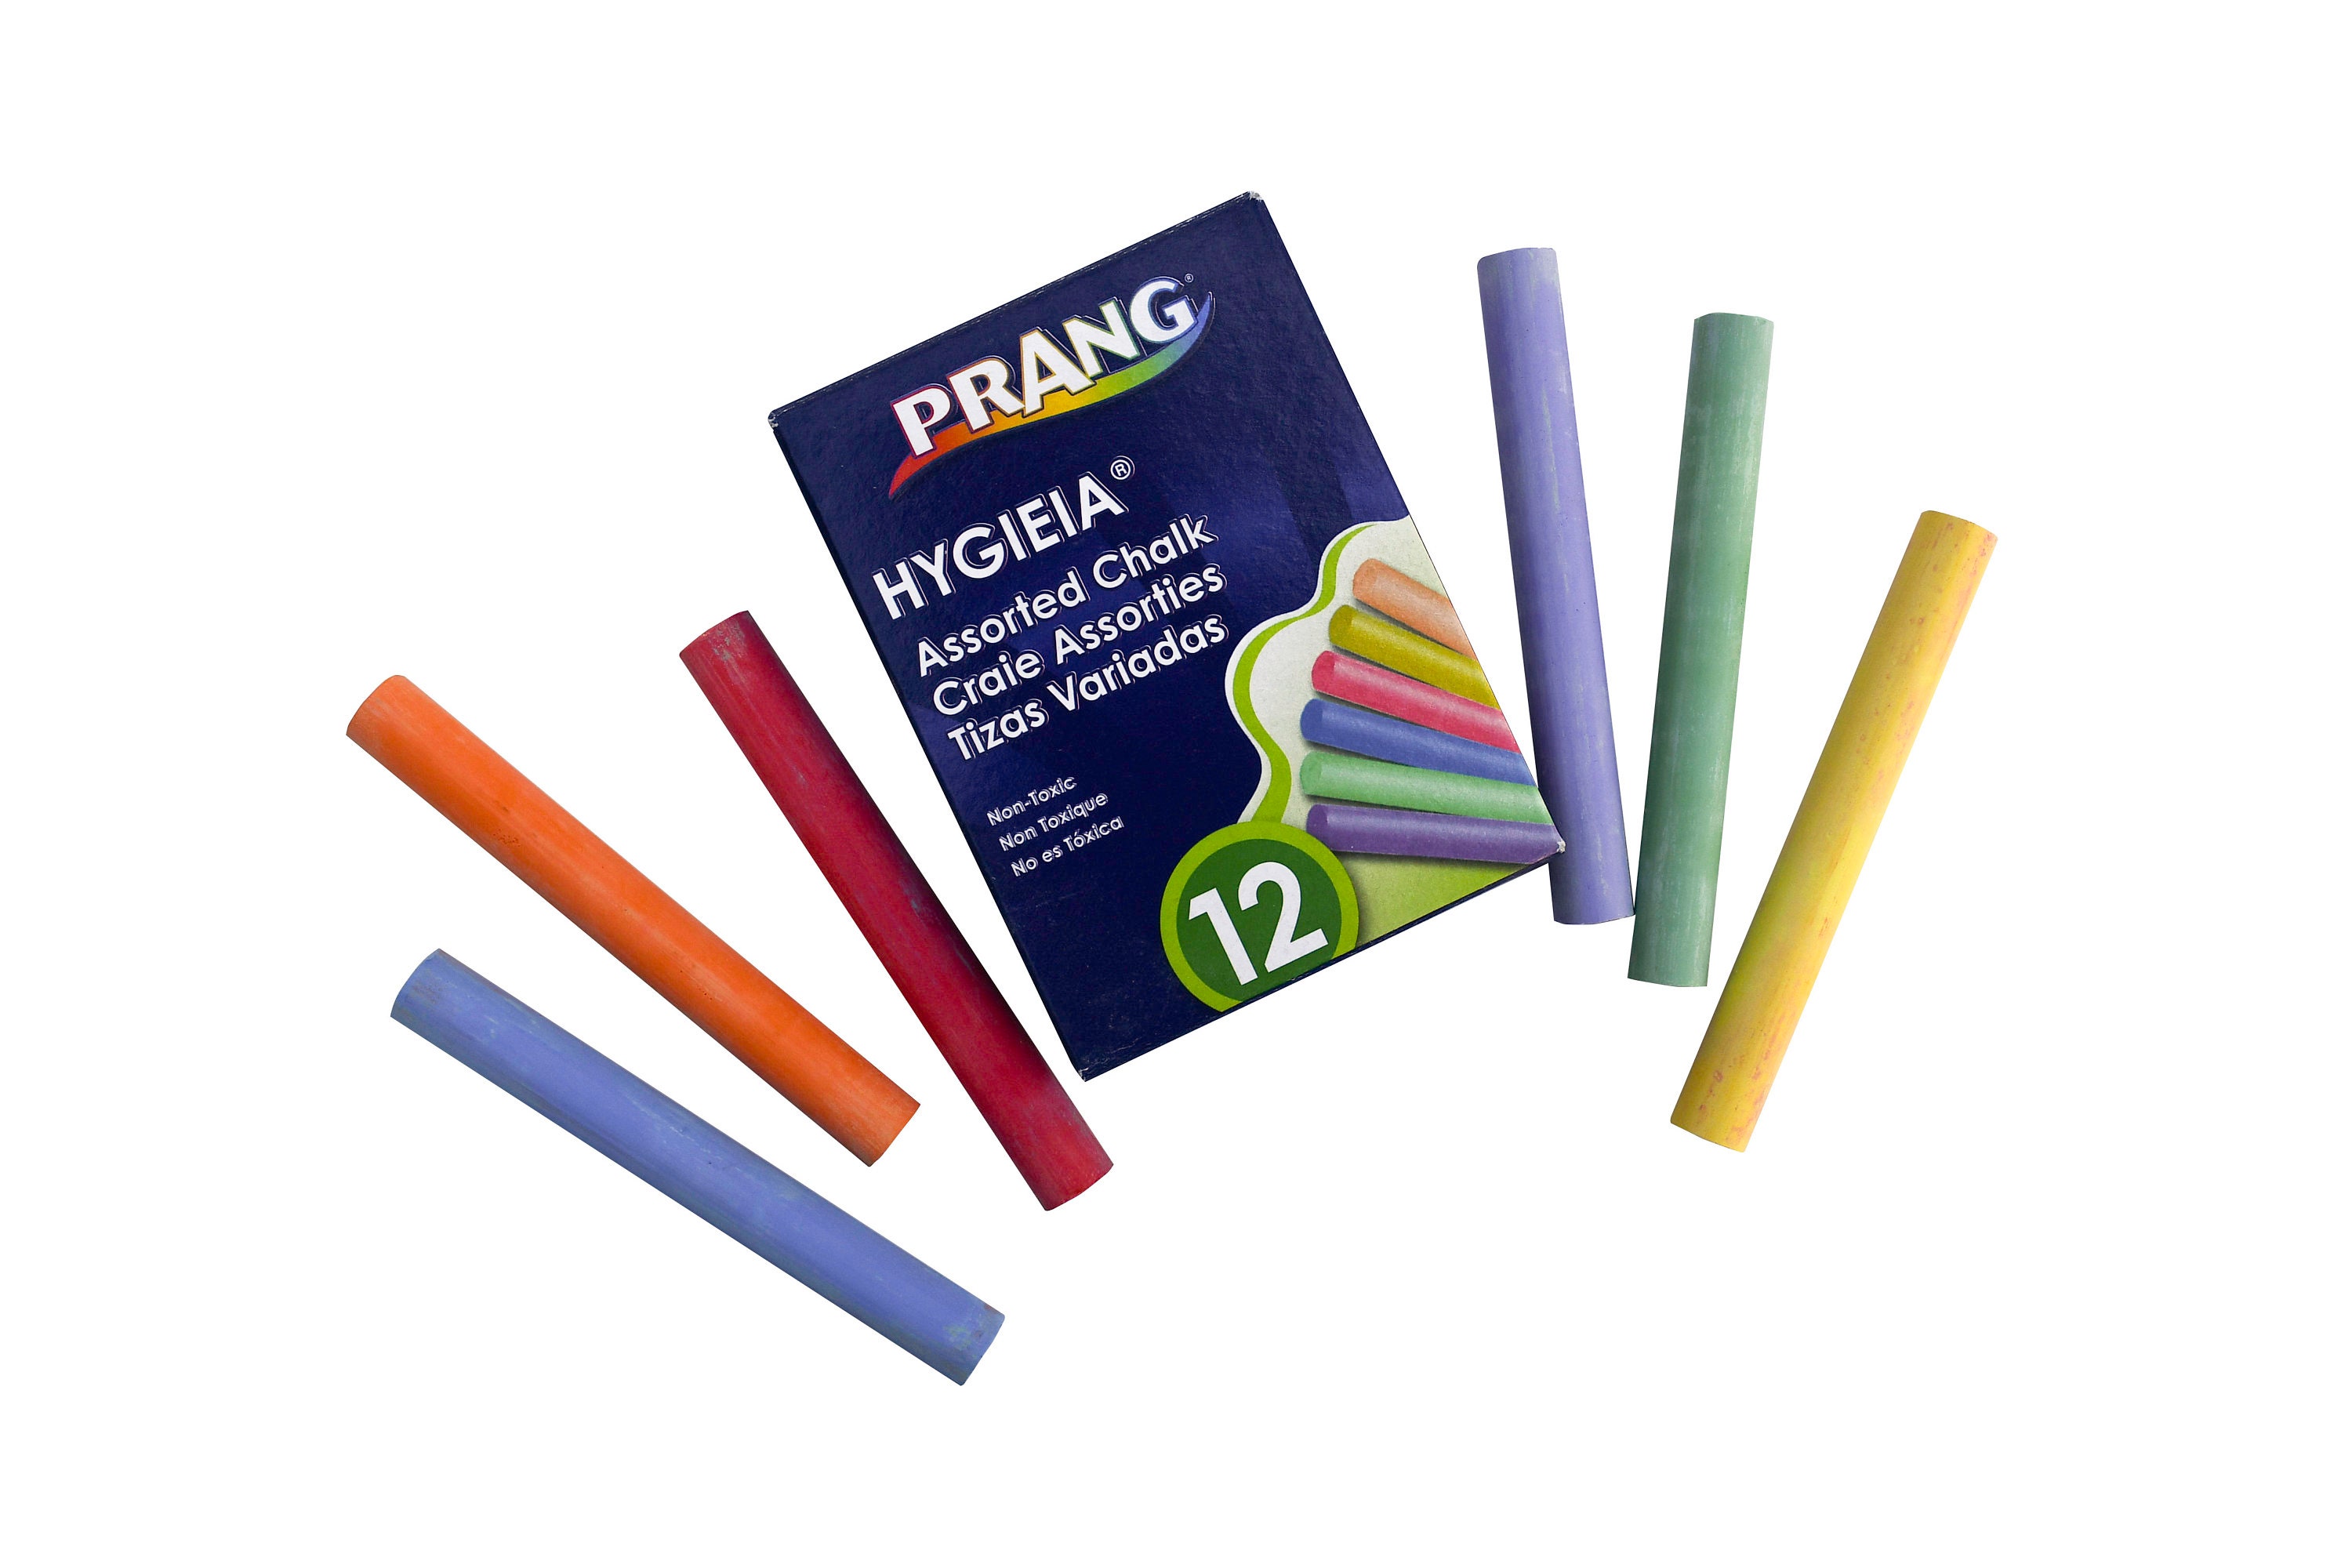 DUST-FREE Chalk Crayons Non-toxic, Water-based Chalk Pens, Chalk Markers,  Kids, Crayons, Wet-erase 